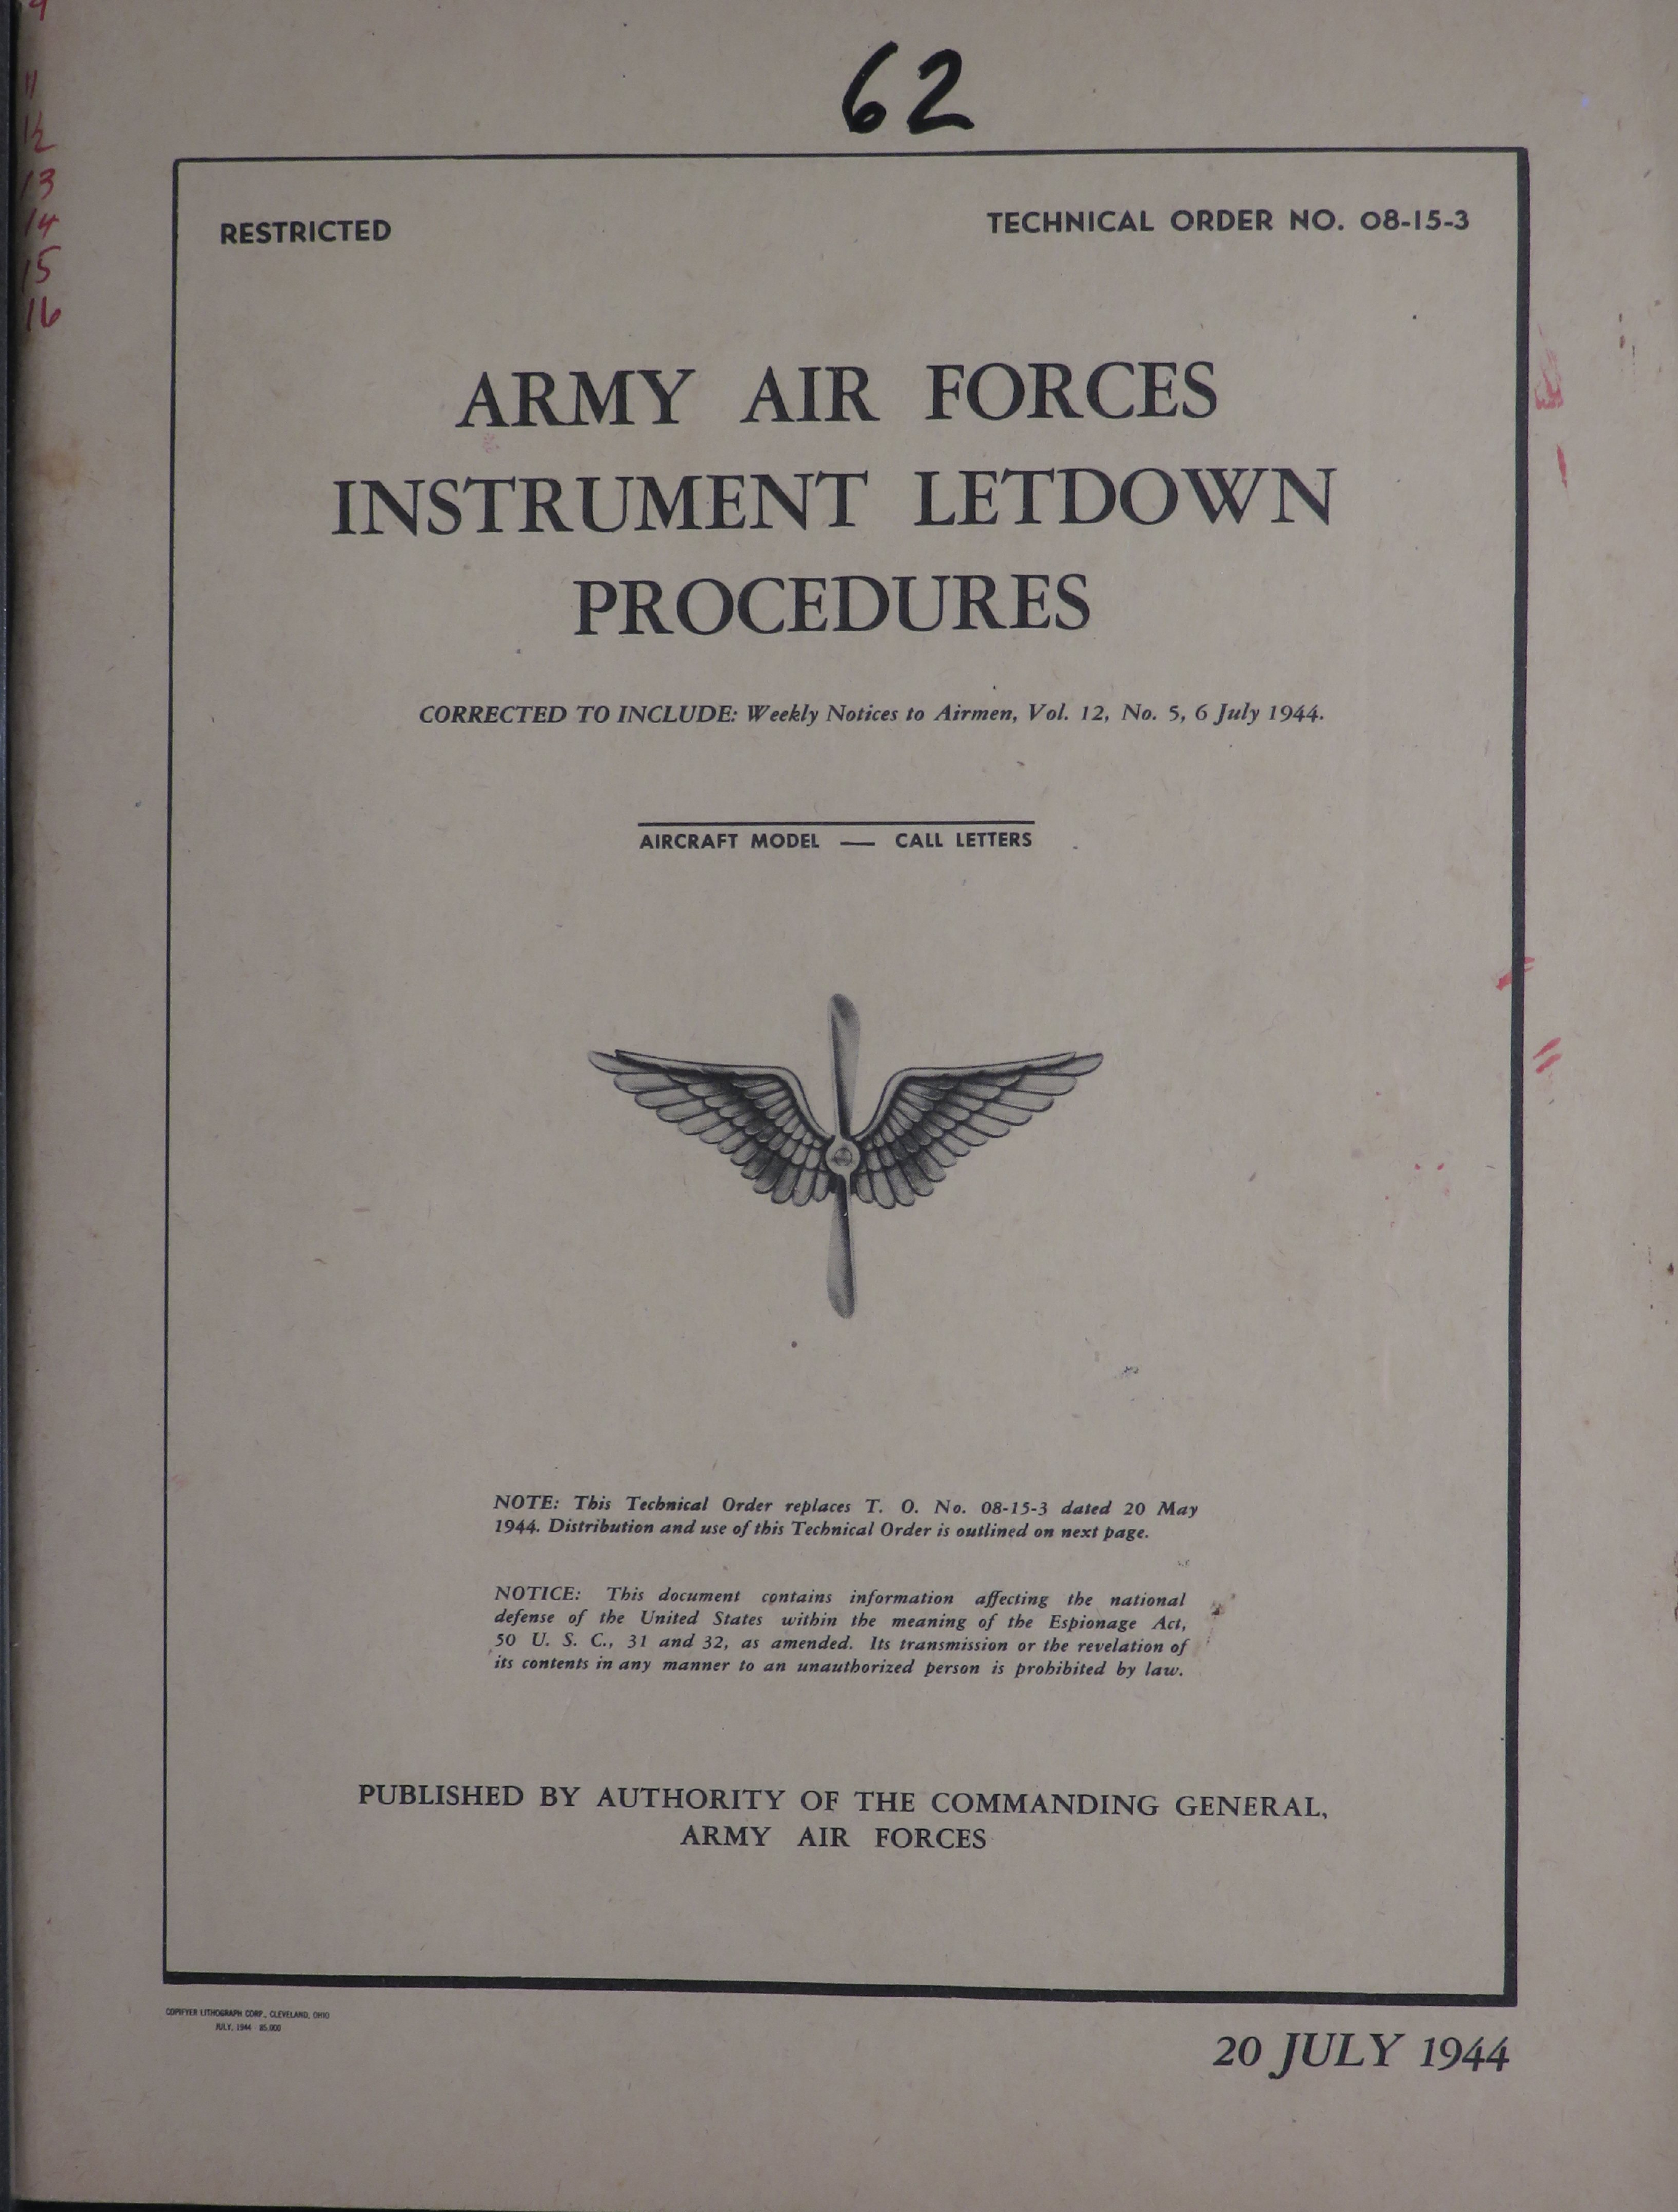 Sample page 1 from AirCorps Library document: Instrument Letdown Procedures